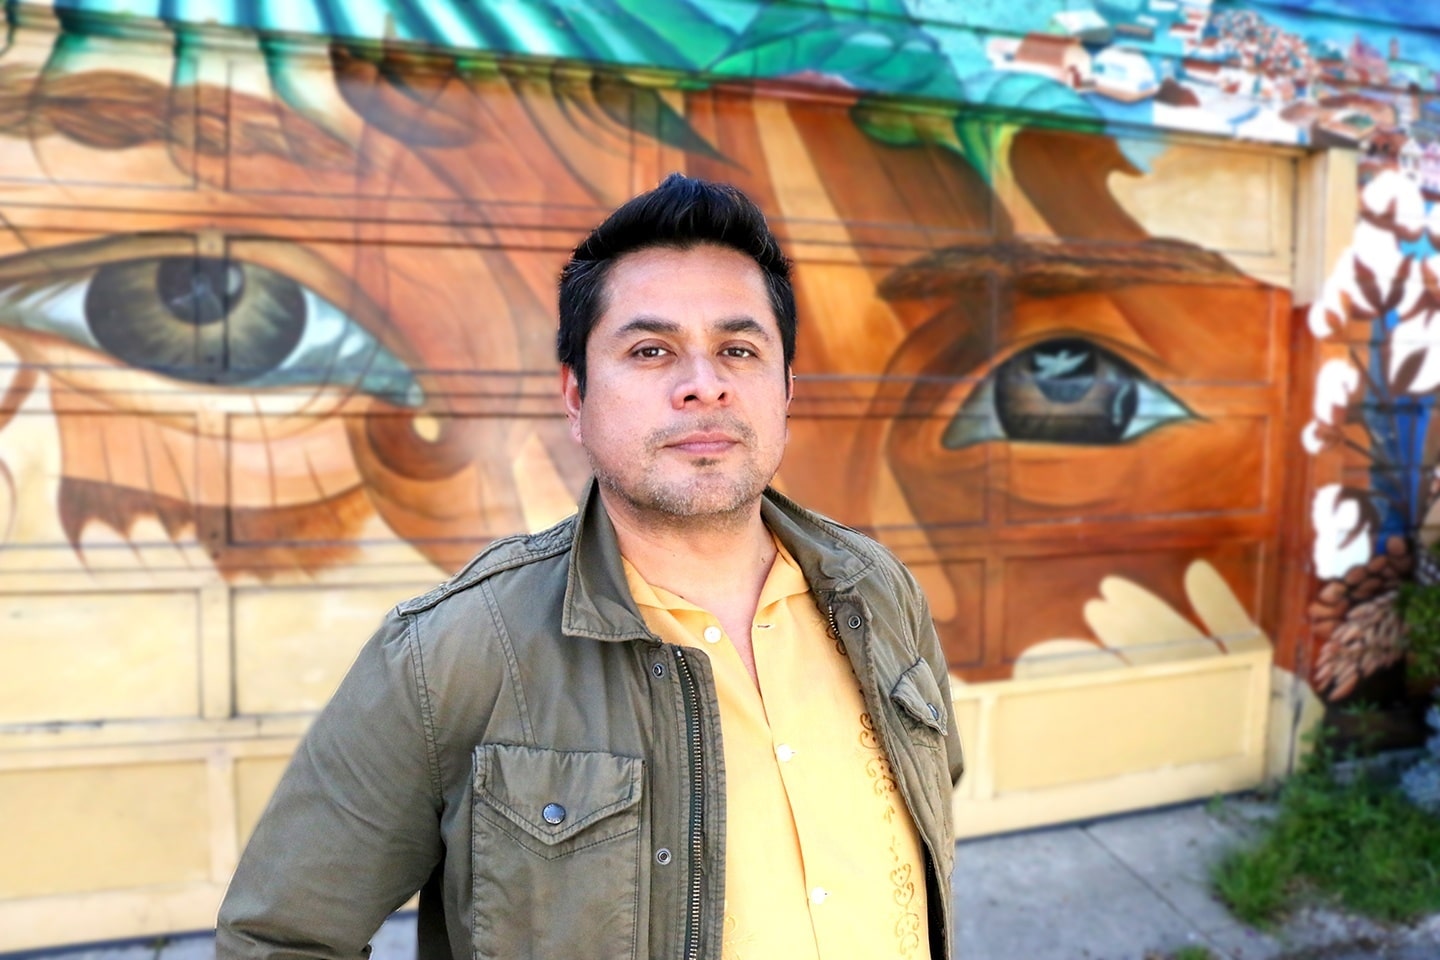 BAVC Board Member Juan Rivera Juan has worked in marketing for over 15 years, focusing in arts and educational nonprofits